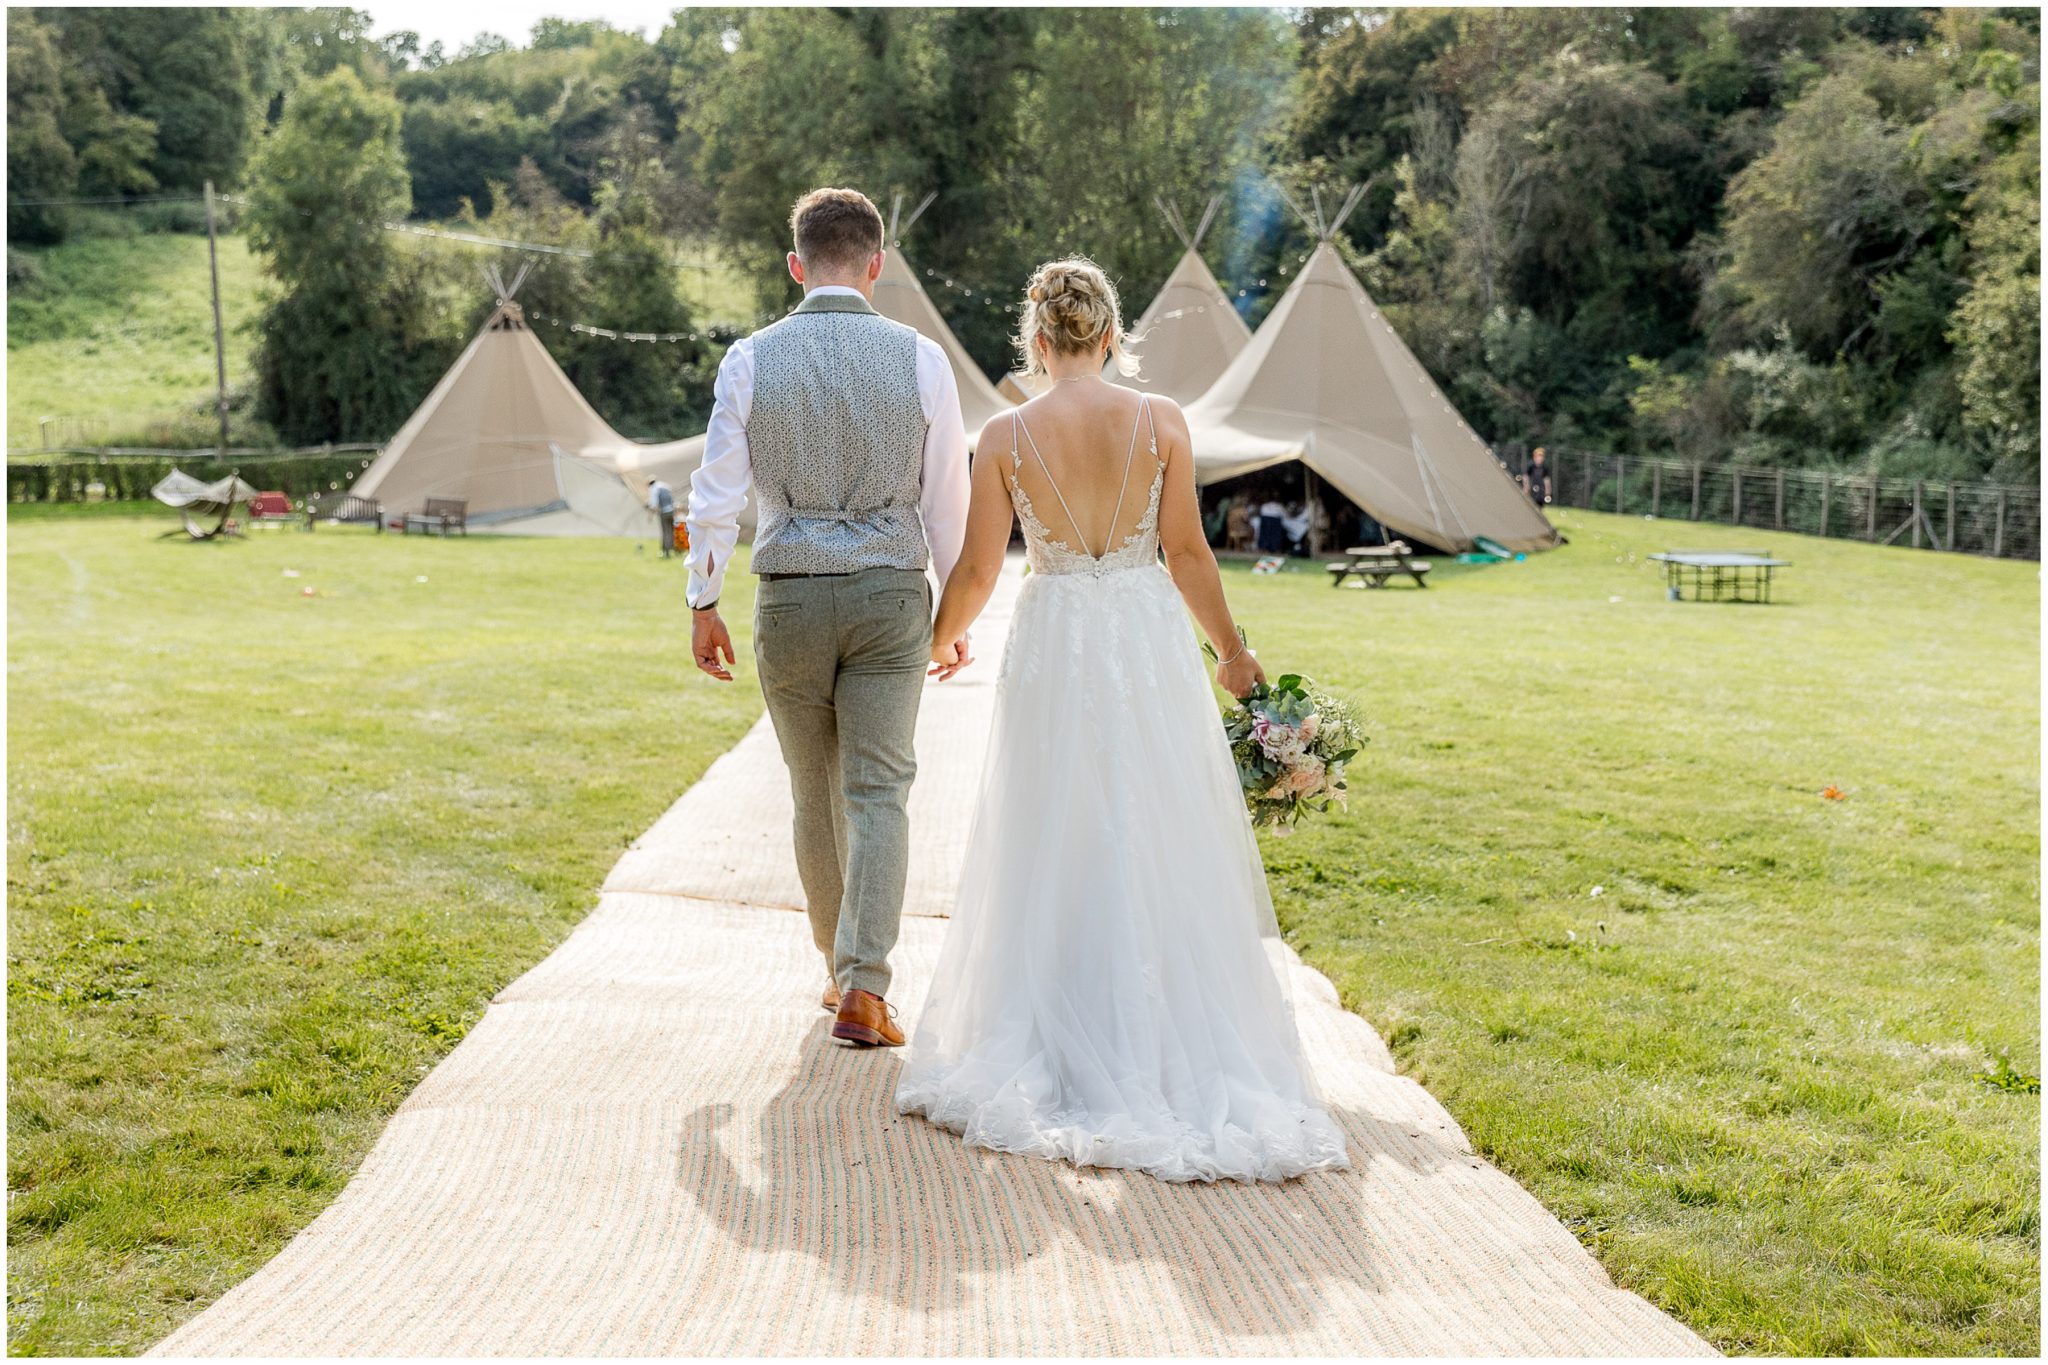 The couple head towards the tipi for the wedding breakfast